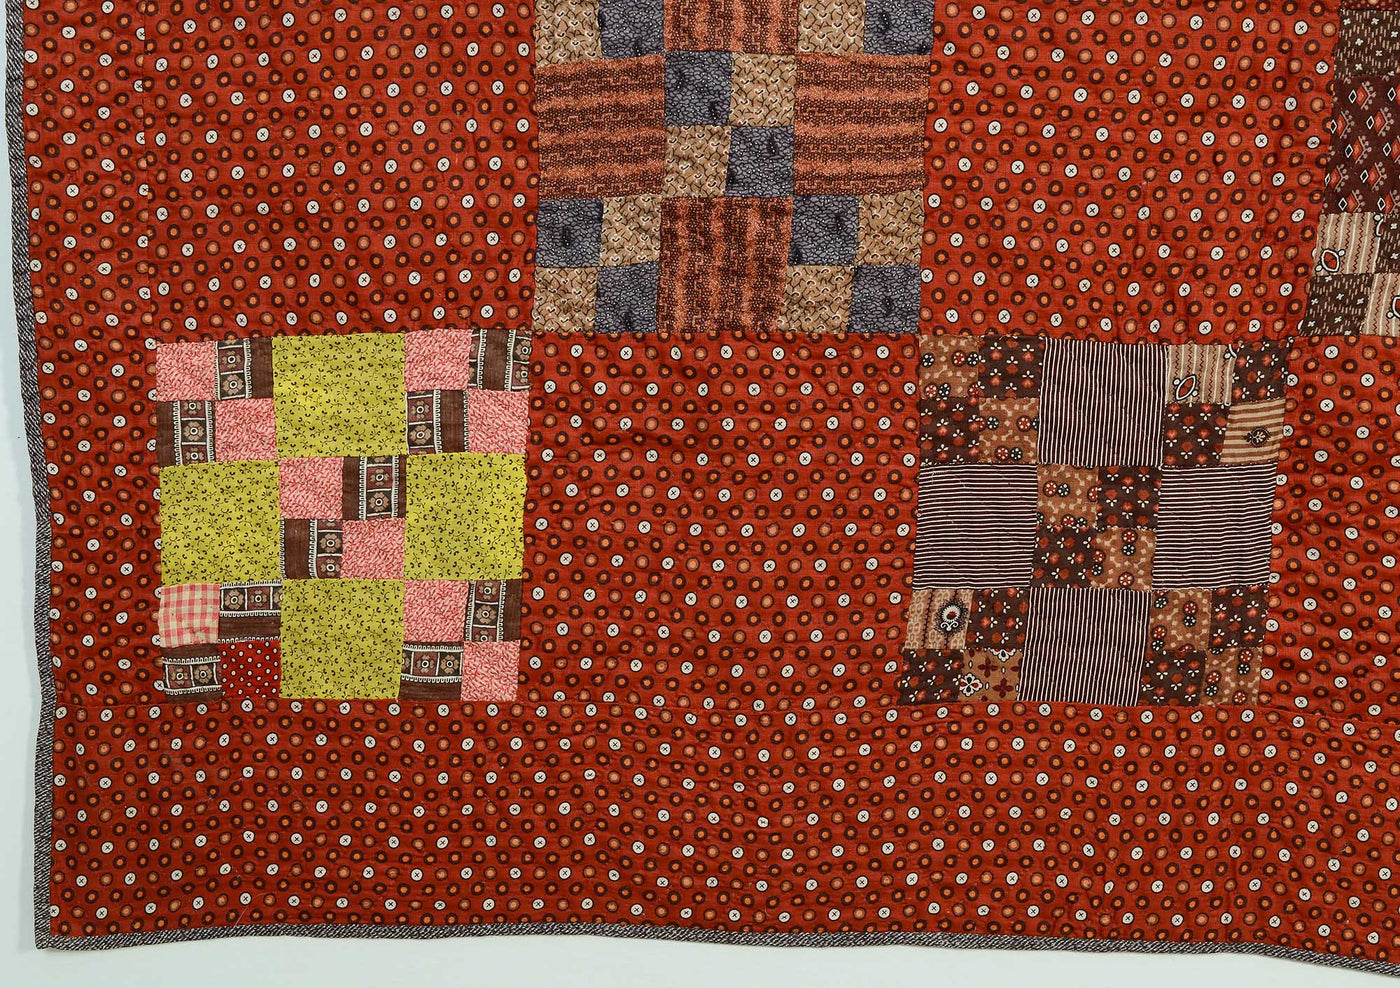 four-patch-in-nine-patch-quilt-1386431-corner-detail-5